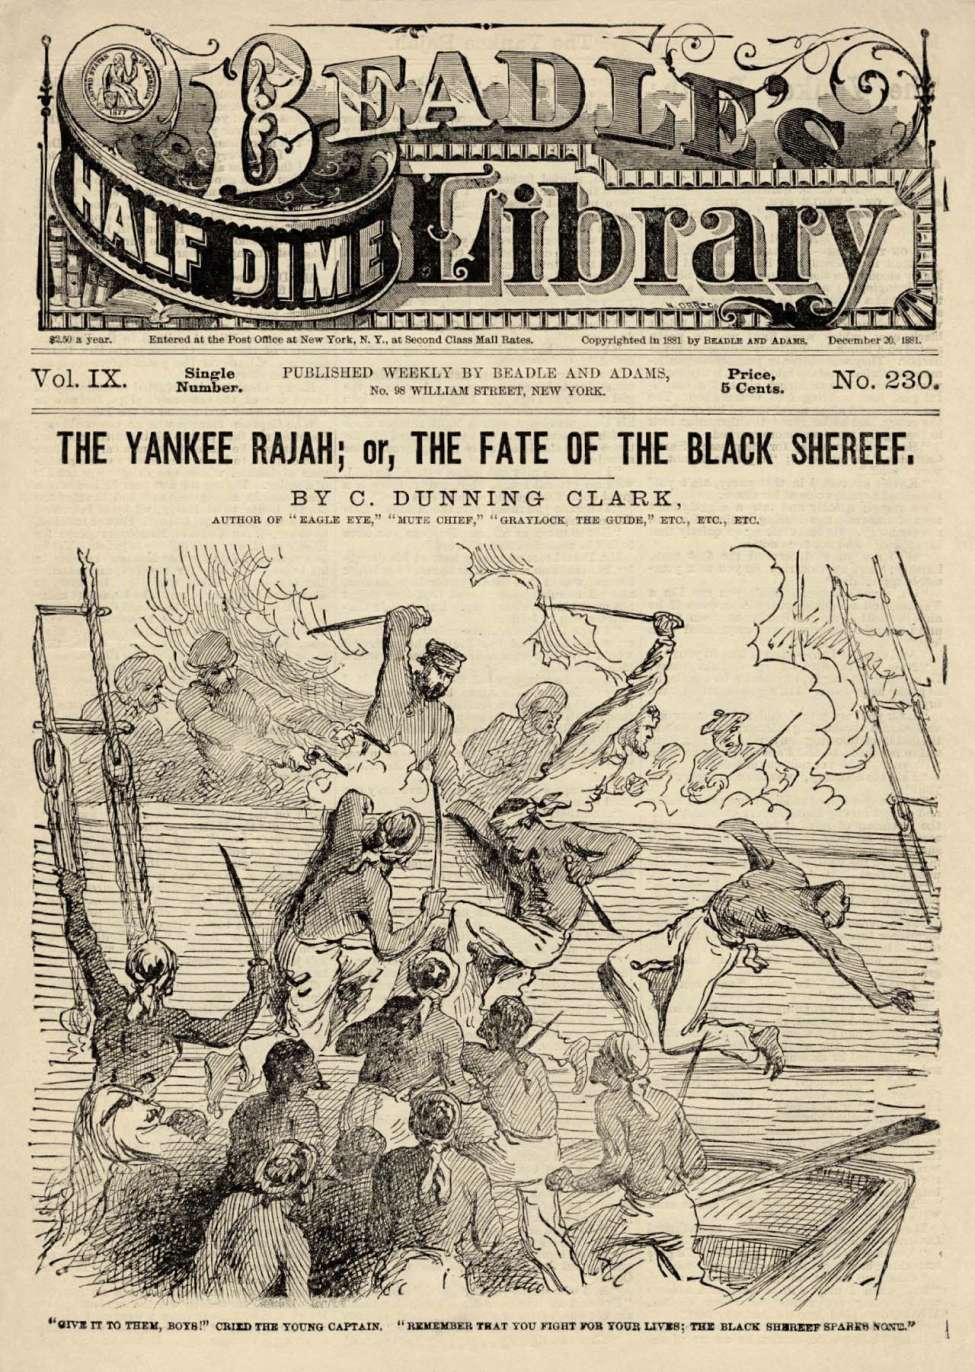 Book Cover For Beadle's Half Dime Library 230 - The Yankee Rajah